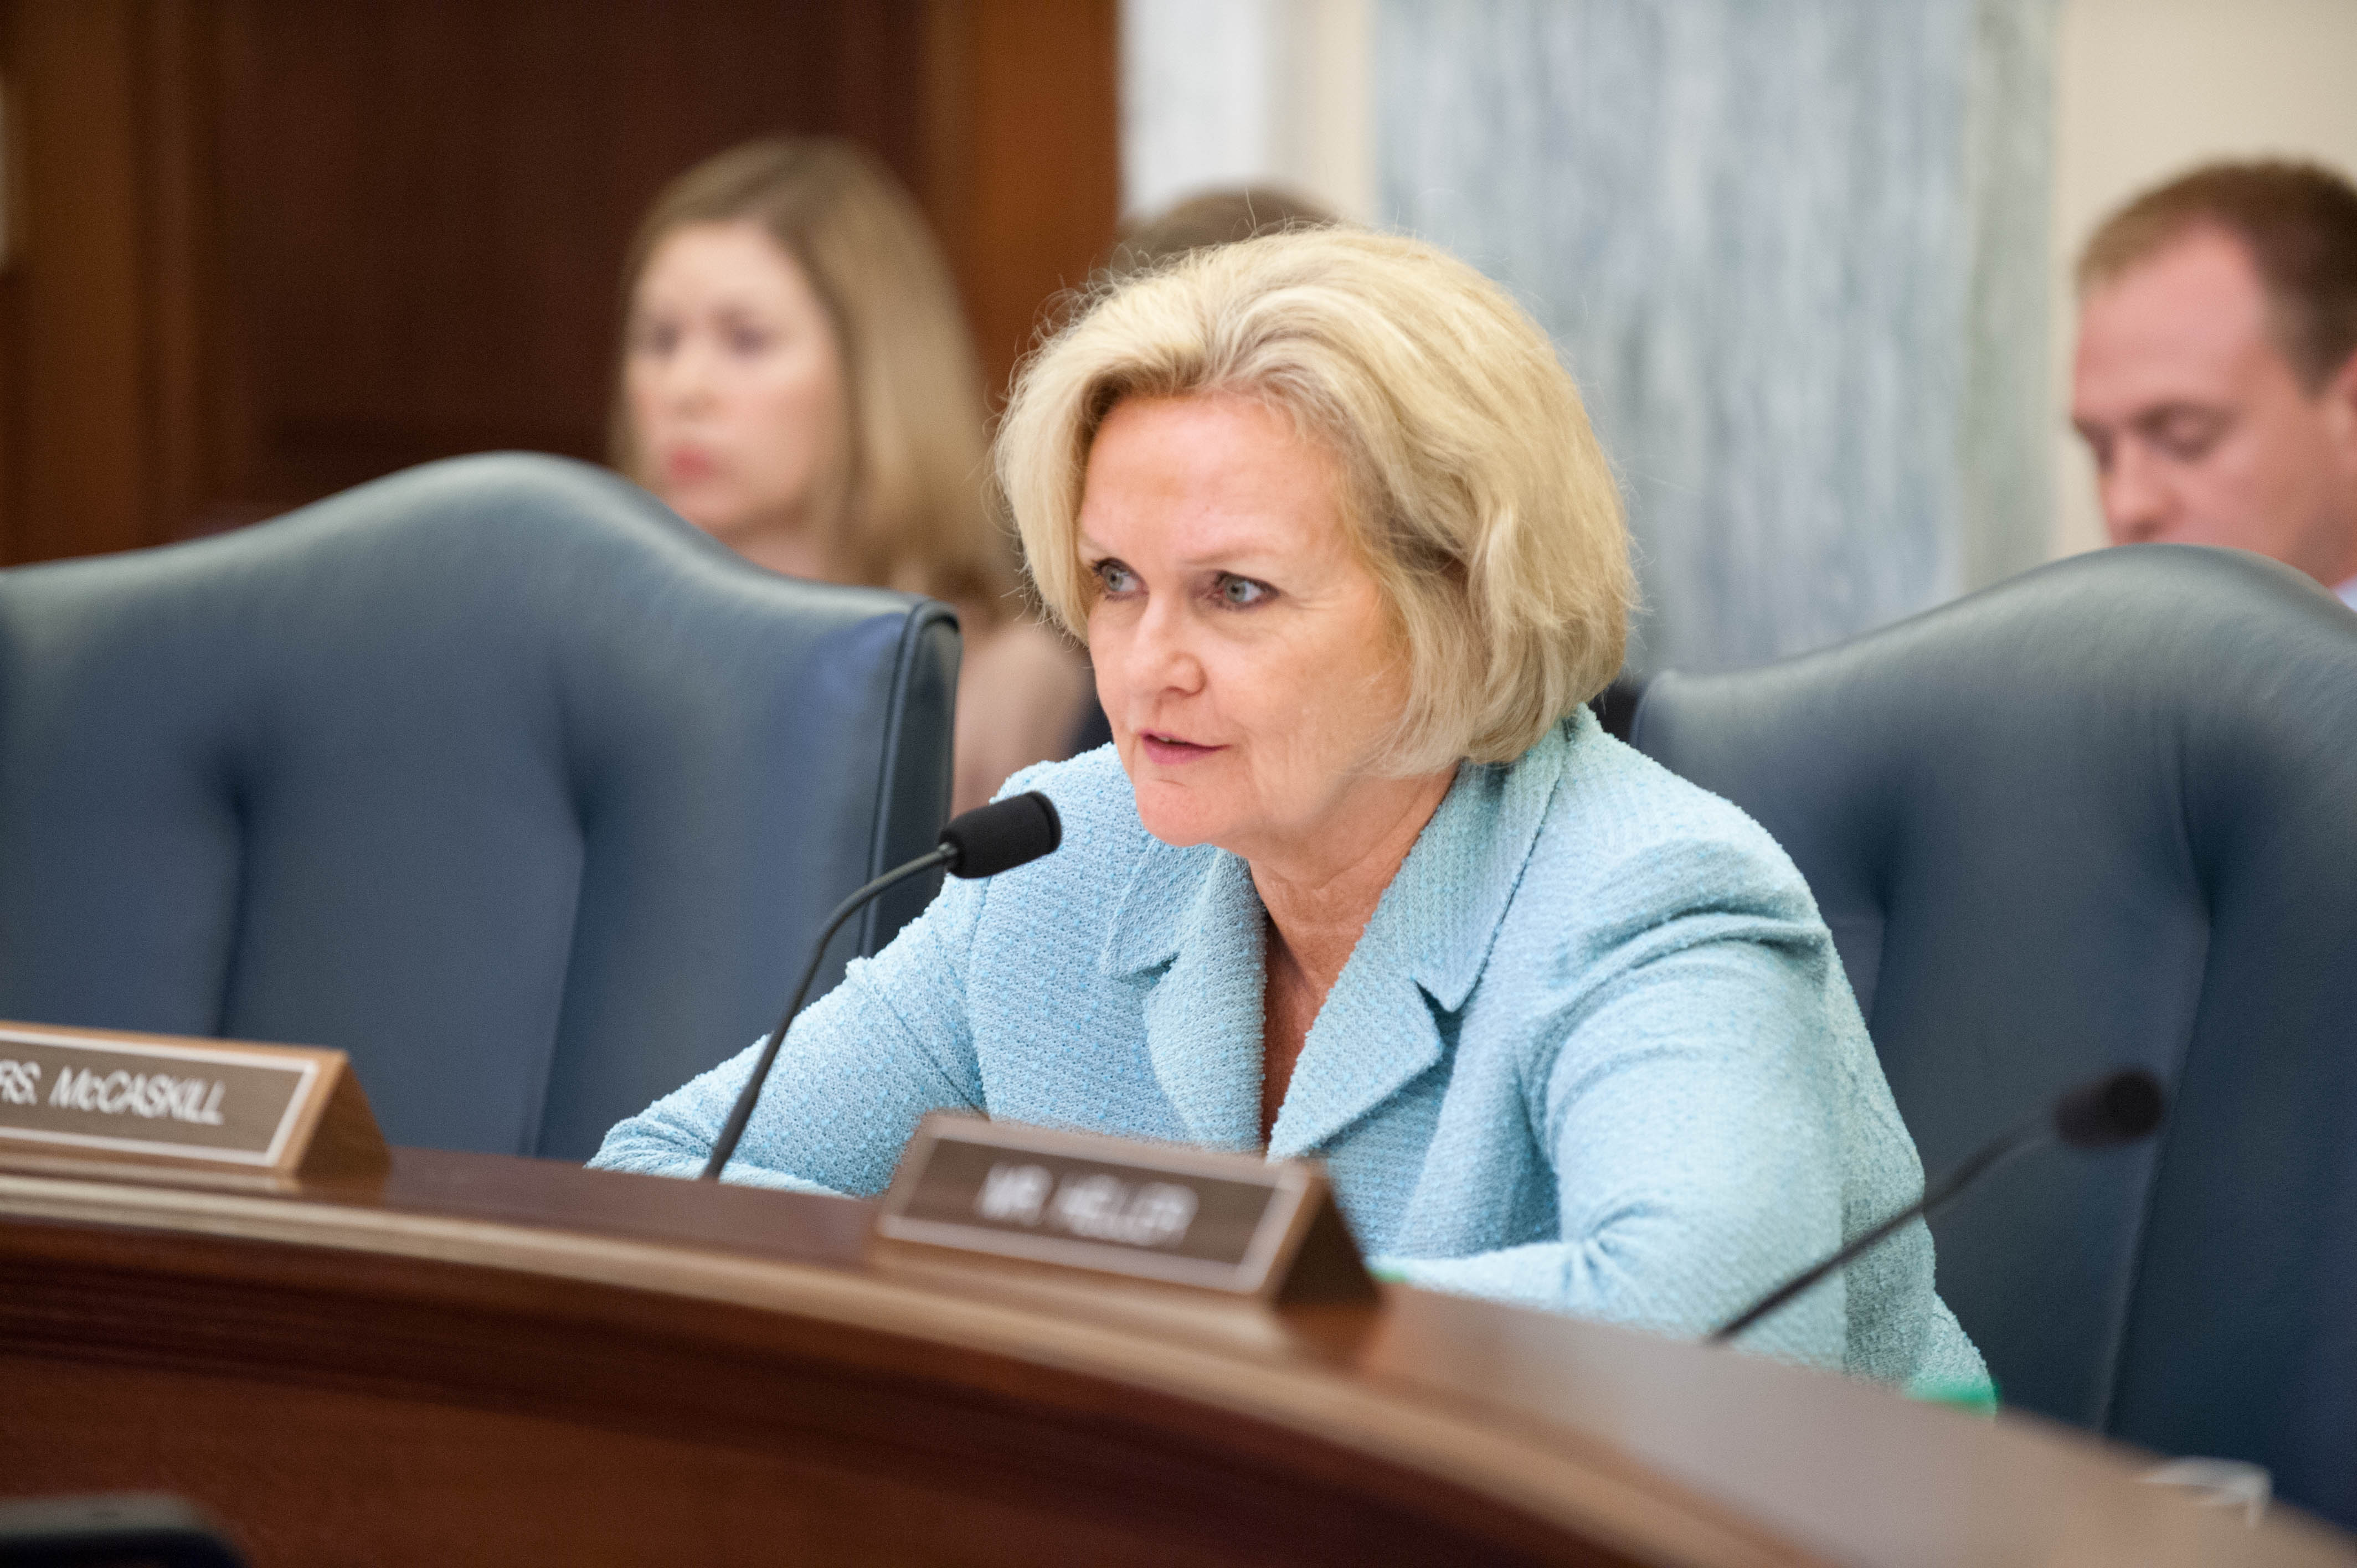 Chairman McCaskill Questions Navy Regarding its Contractor that Oversees Contractor Access to Navy Installations